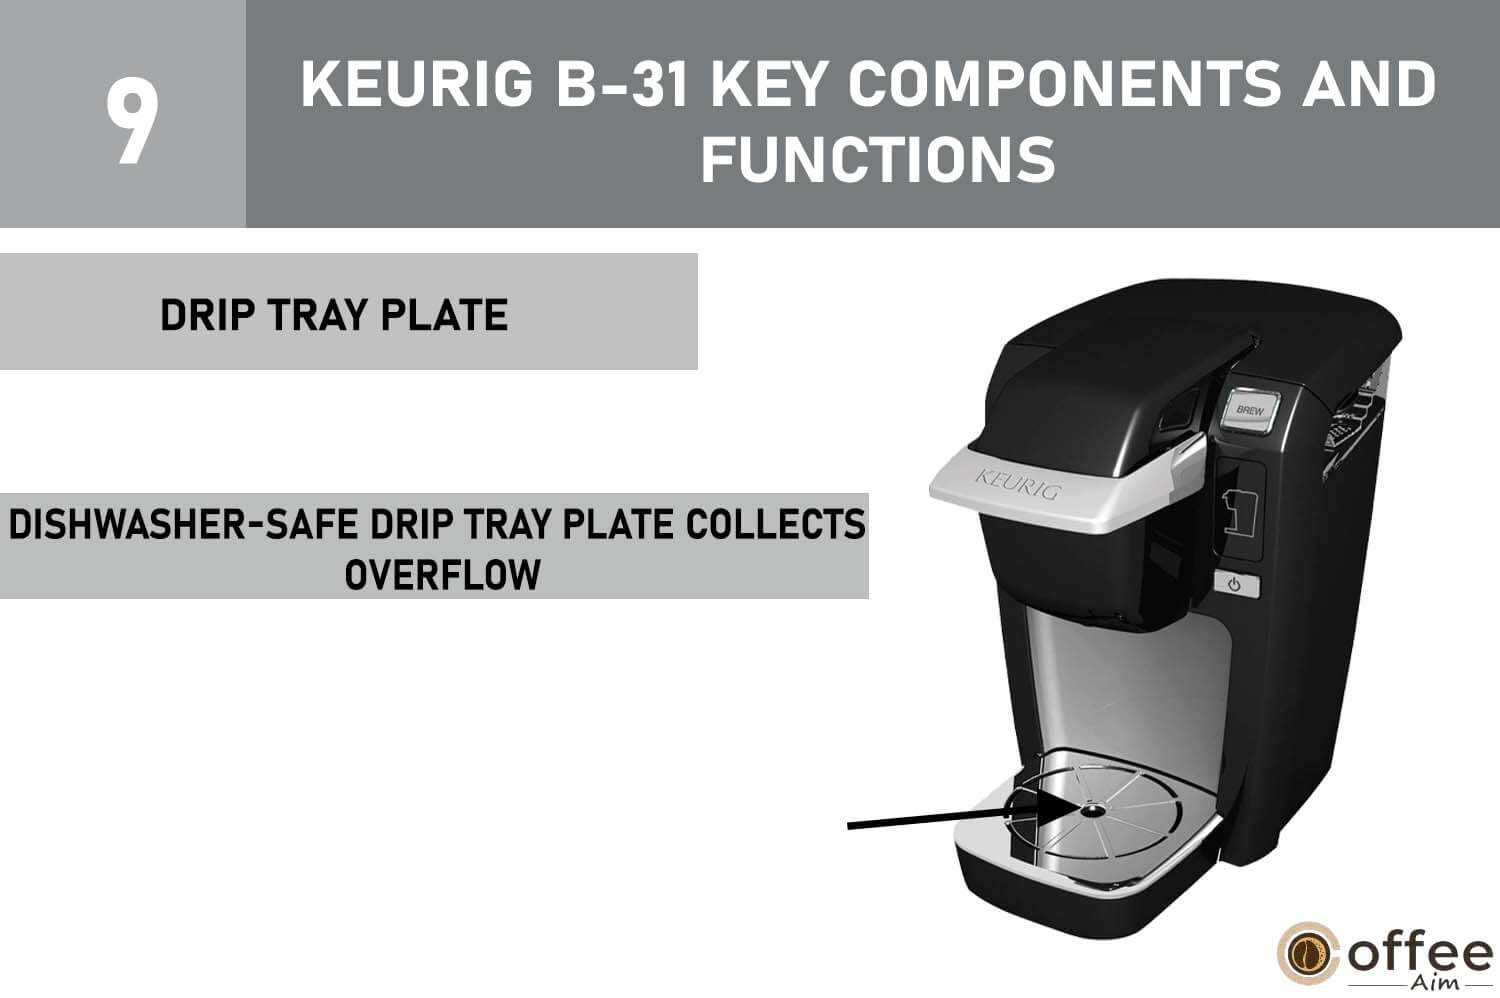 This image illustrates the component known as the 'Drip Tray Plate' of the Keurig B-31 coffee maker, featured in the article 'How To Use Keurig B-31'.